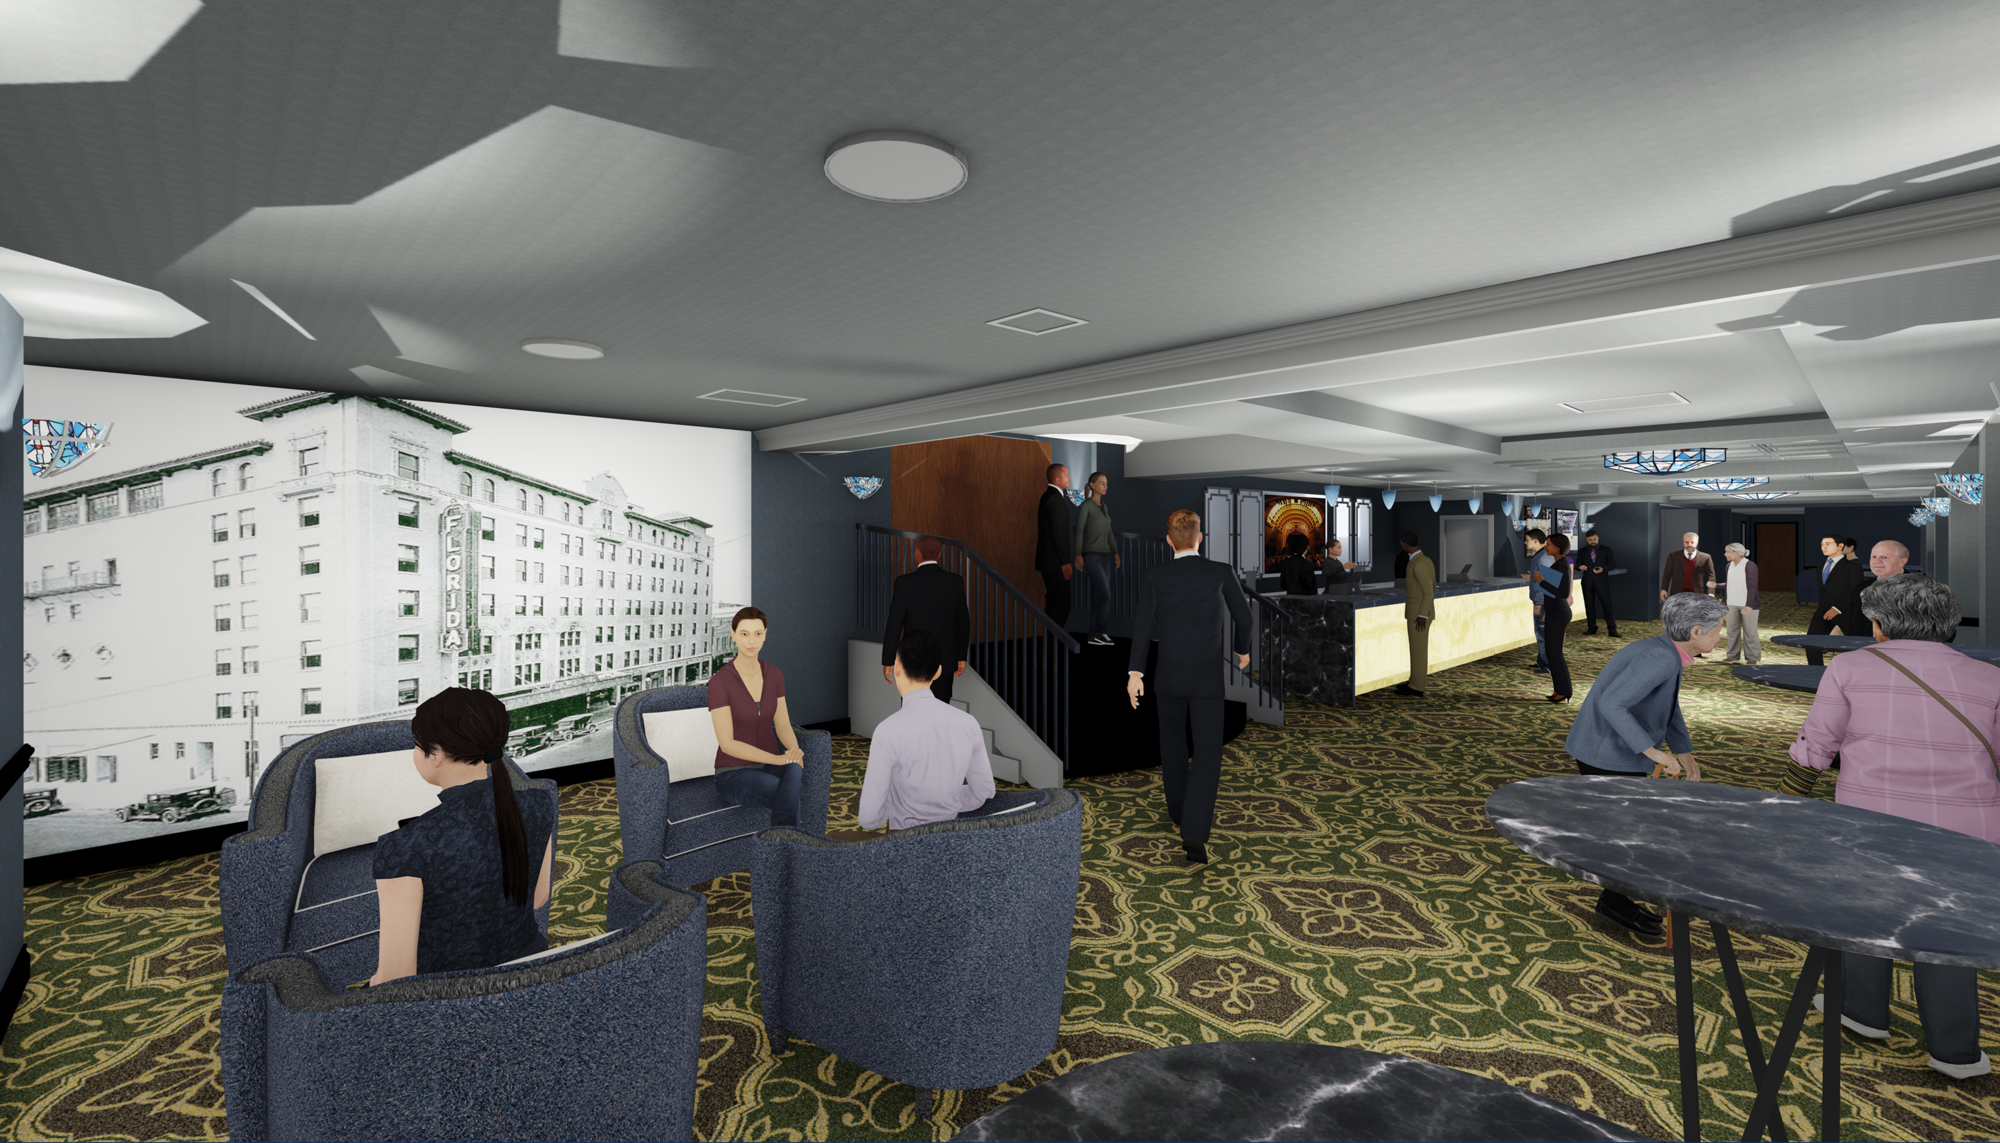 The renovation will create a 3,000-square-foot VIP lounge